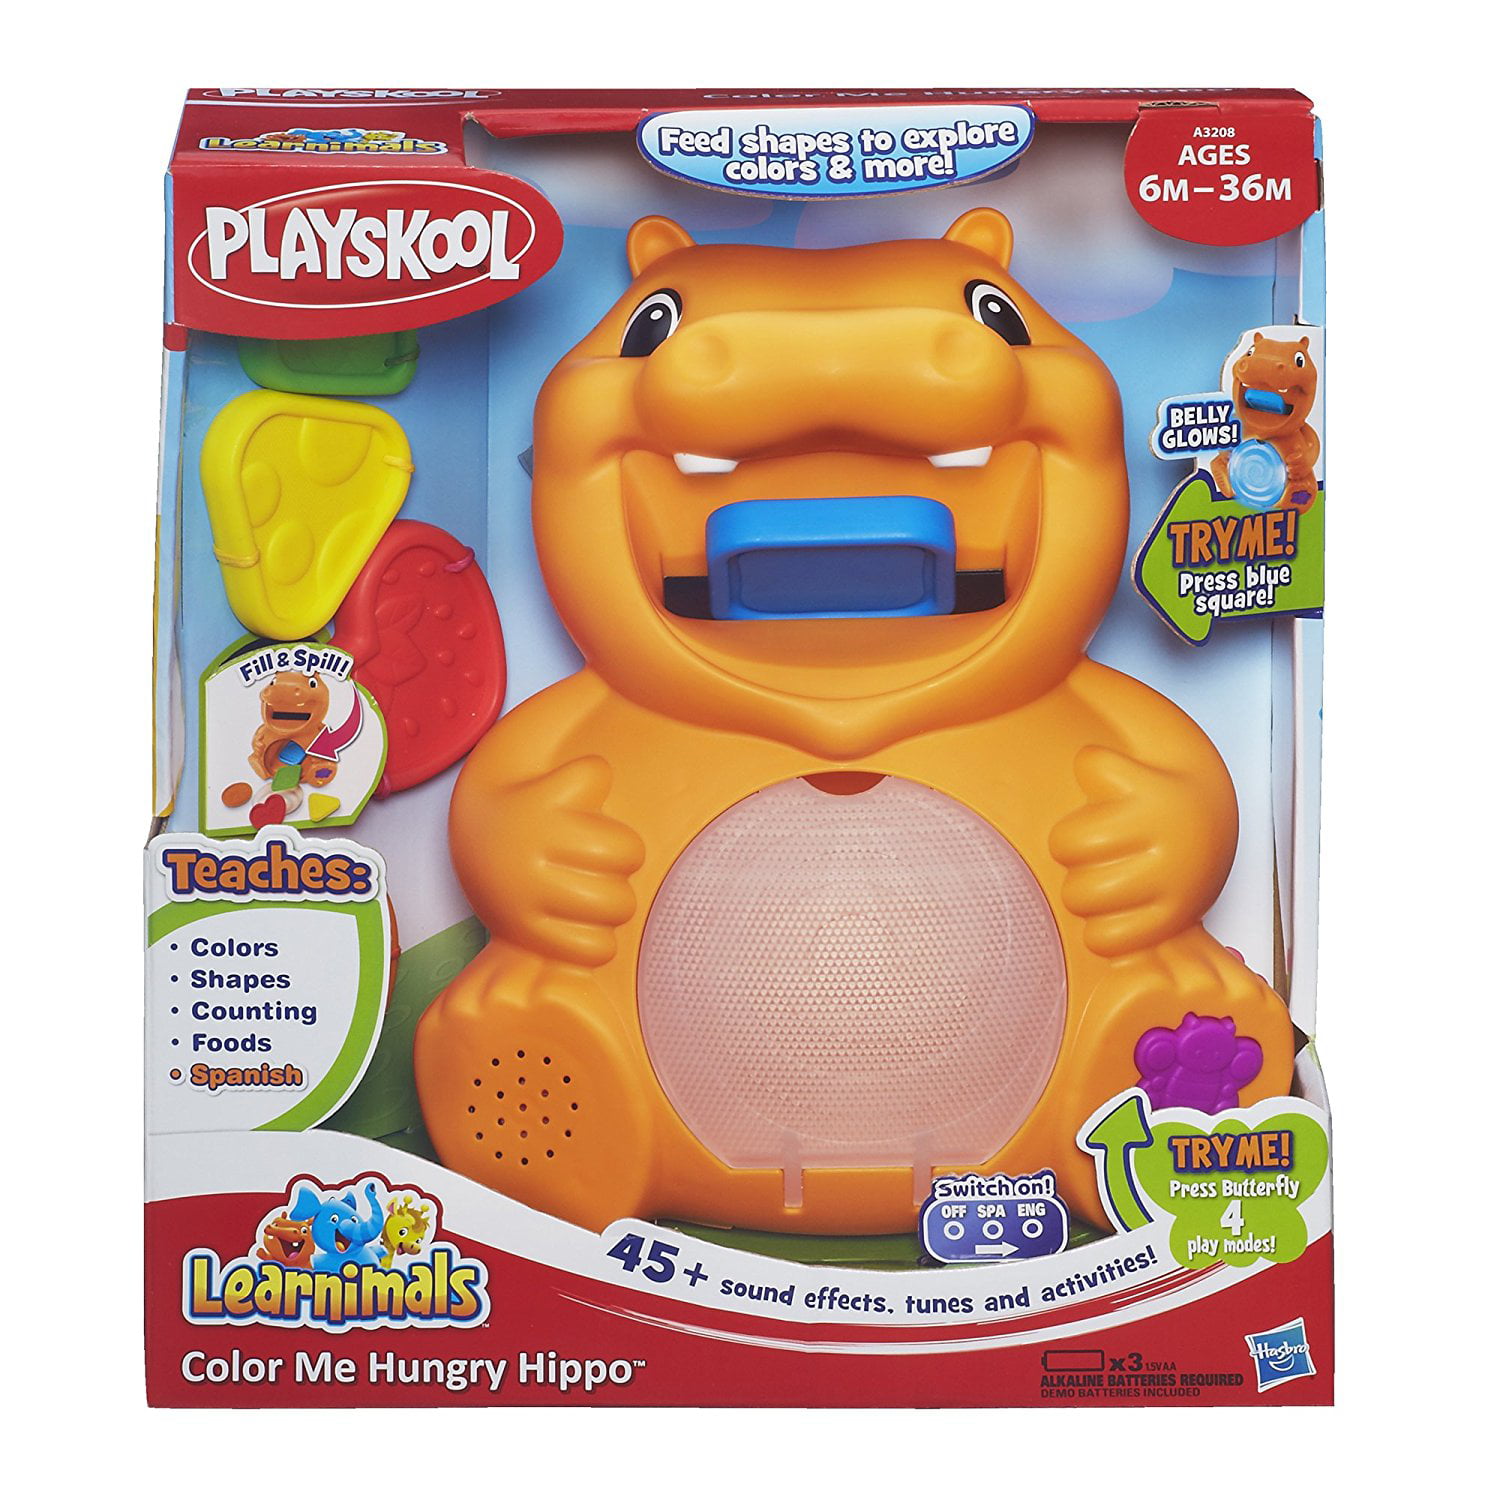 Playskool Learnimals Color Me Hungry Hippo Toy 